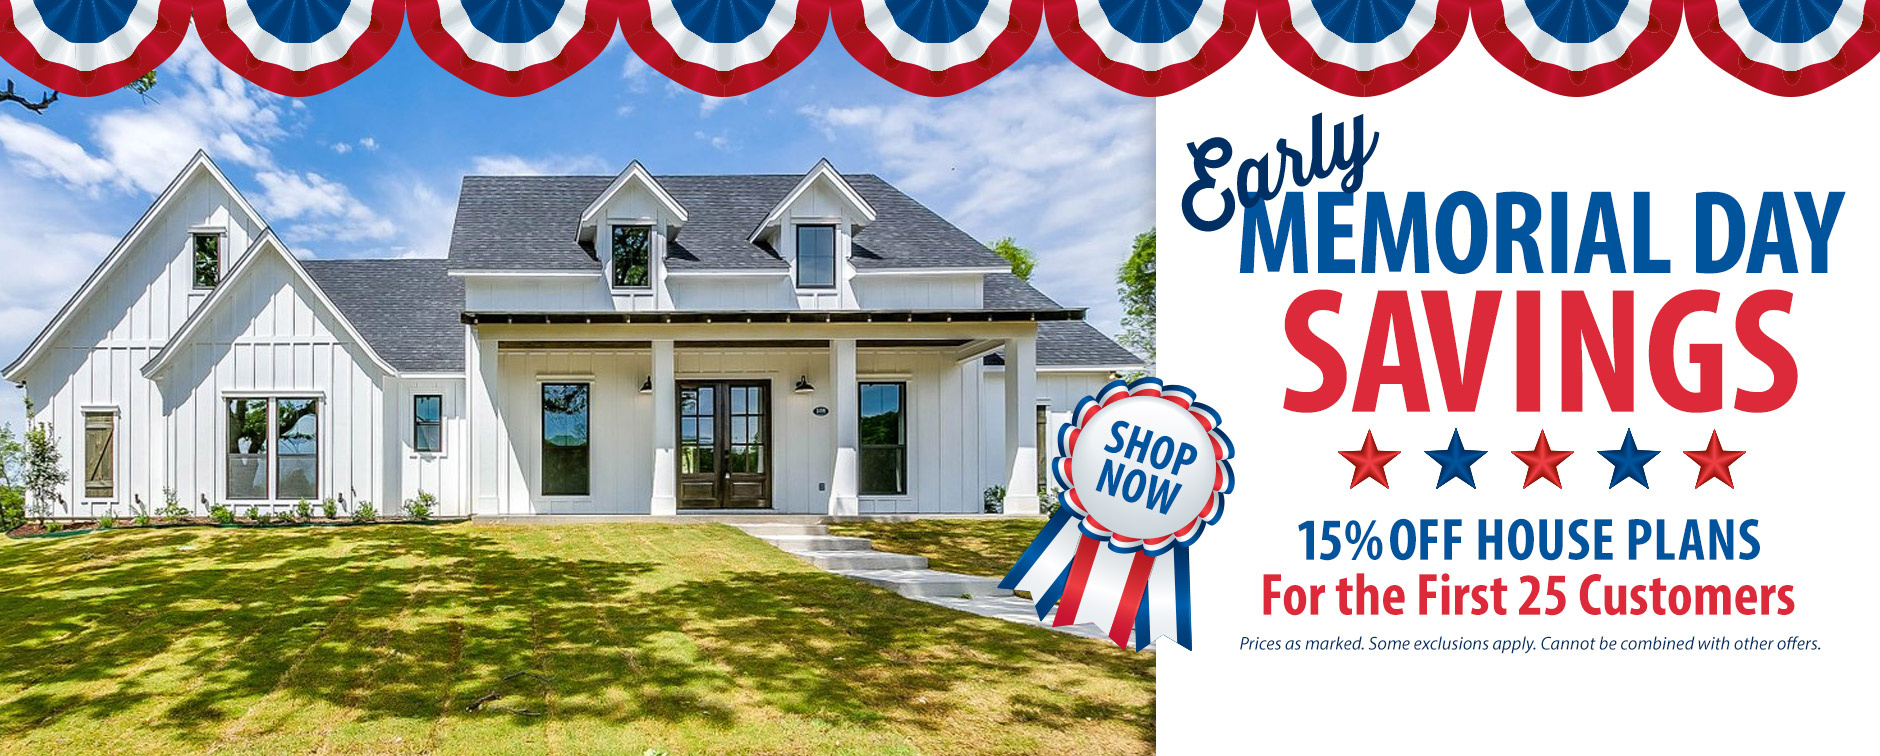 Early Memorial Day Savings: 15% Off House Plans for First 25 Customers